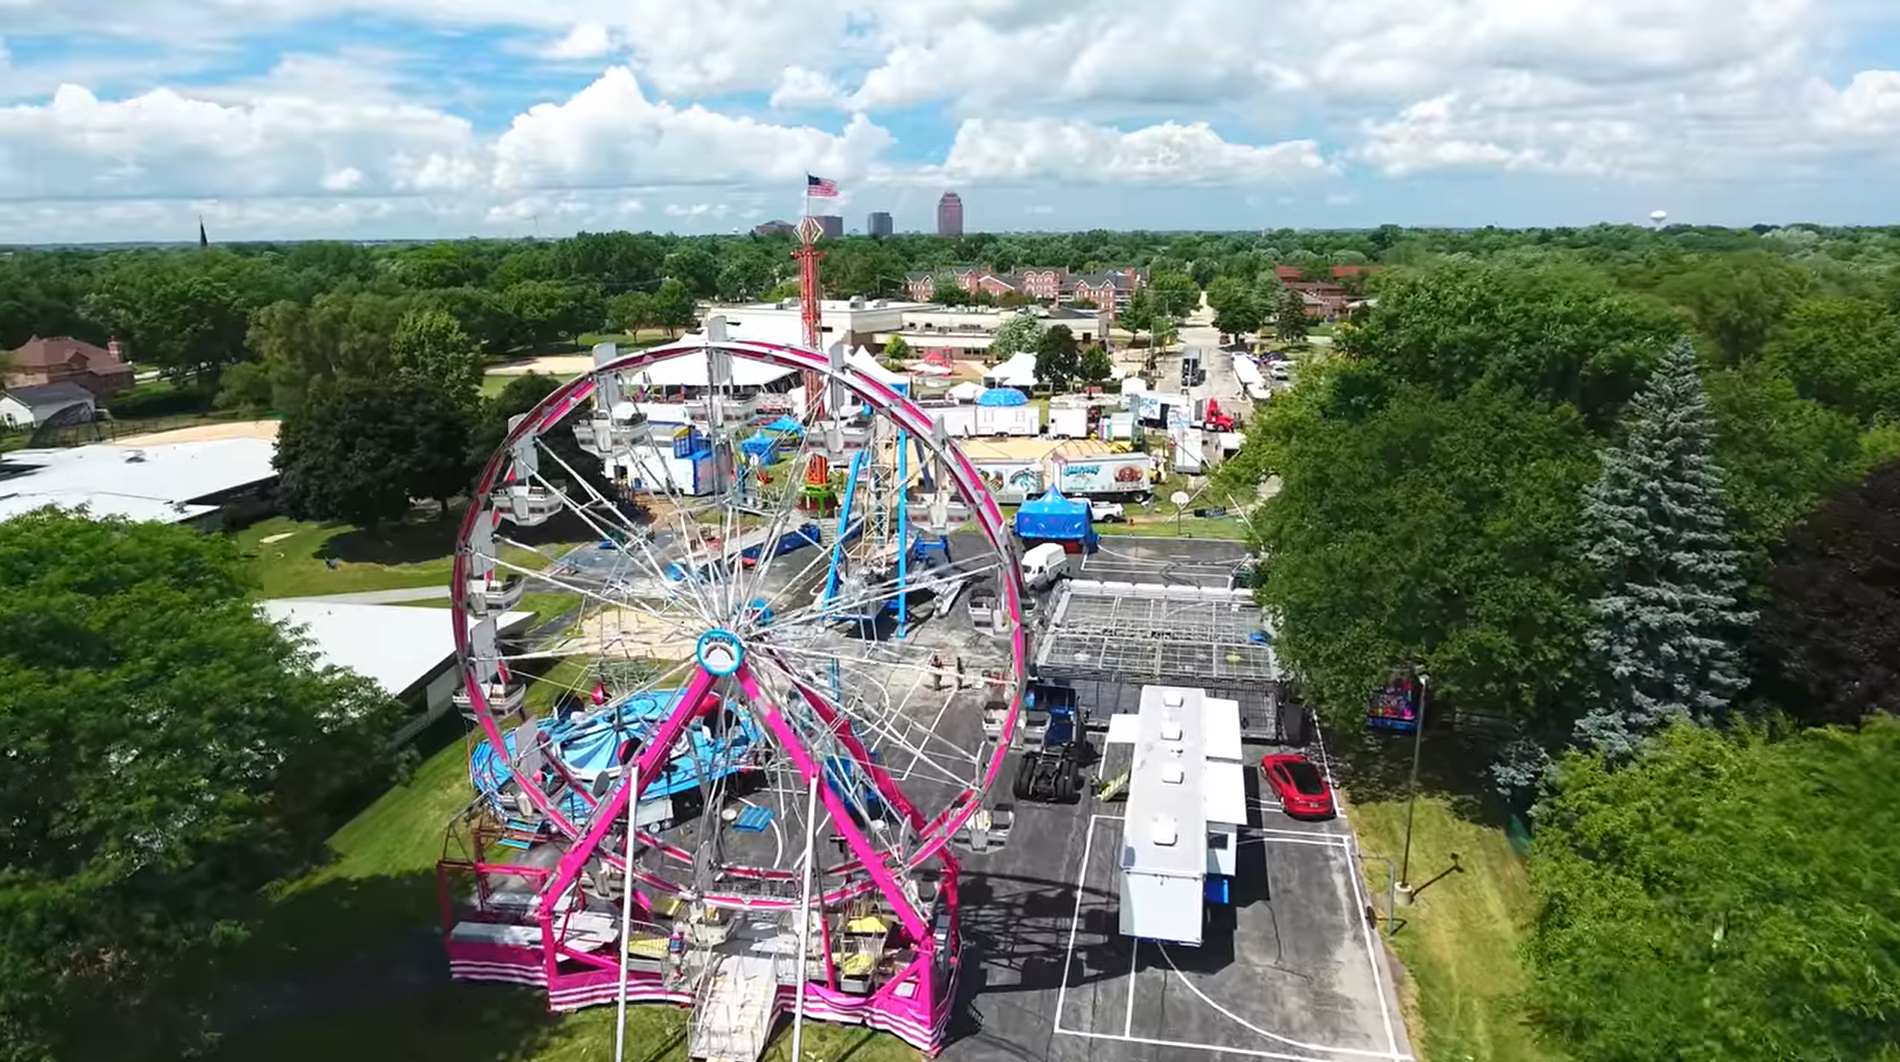 aerial shot of Ferris wheel, with adjacent carnival setups, surrounded by trees under a clear blue sky in the Itasca Fest area.